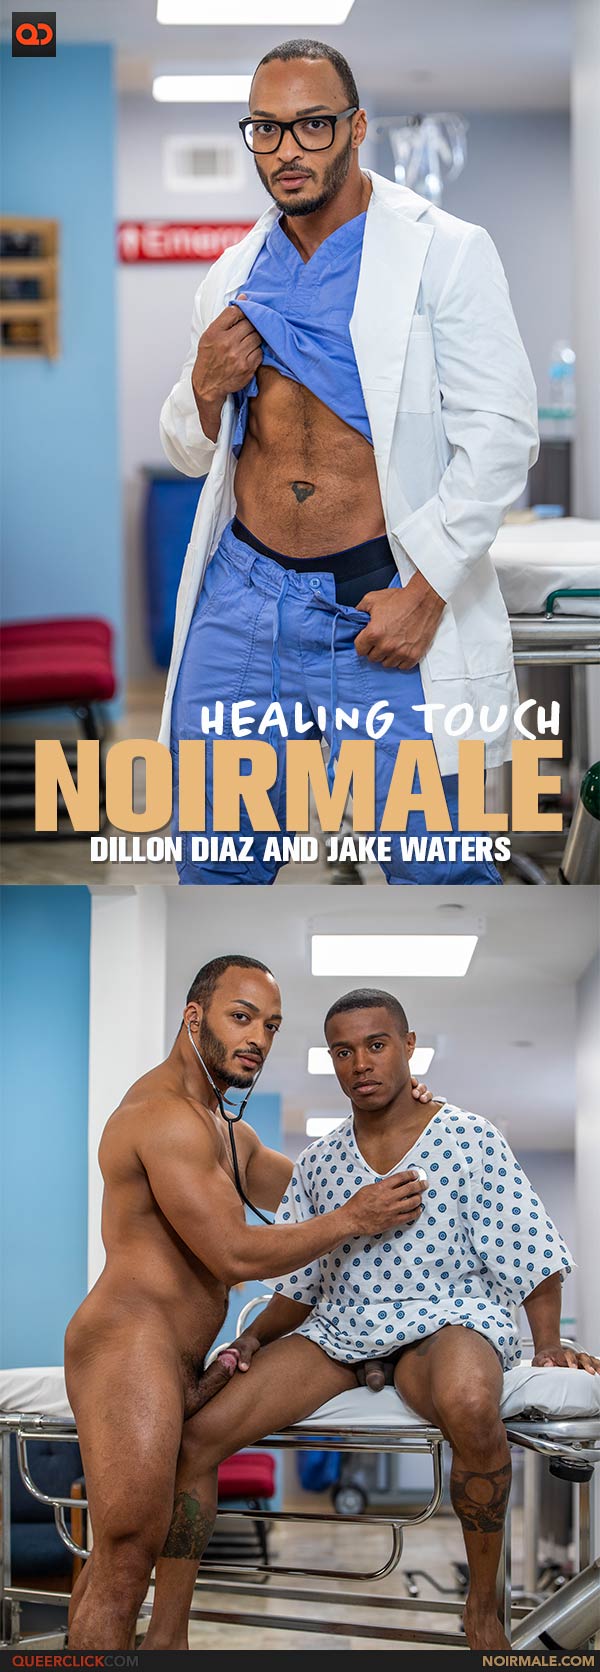 NoirMale: Dillon Diaz and Jake Waters